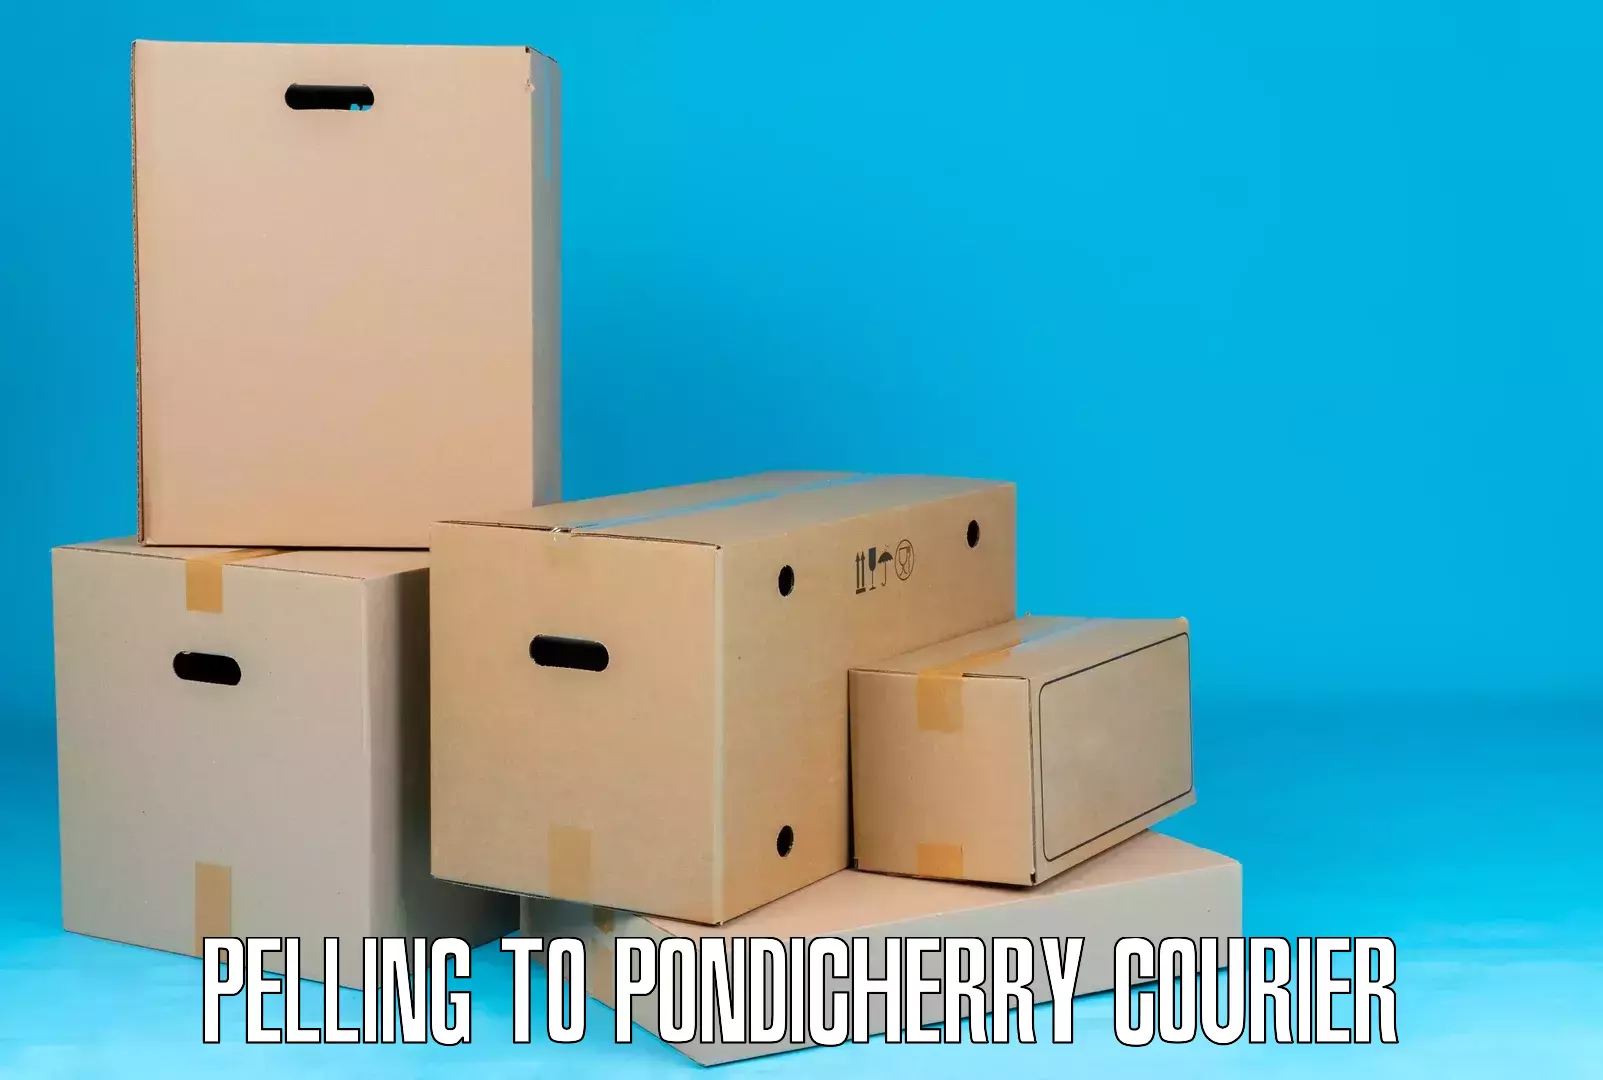 Easy access courier services Pelling to Pondicherry University